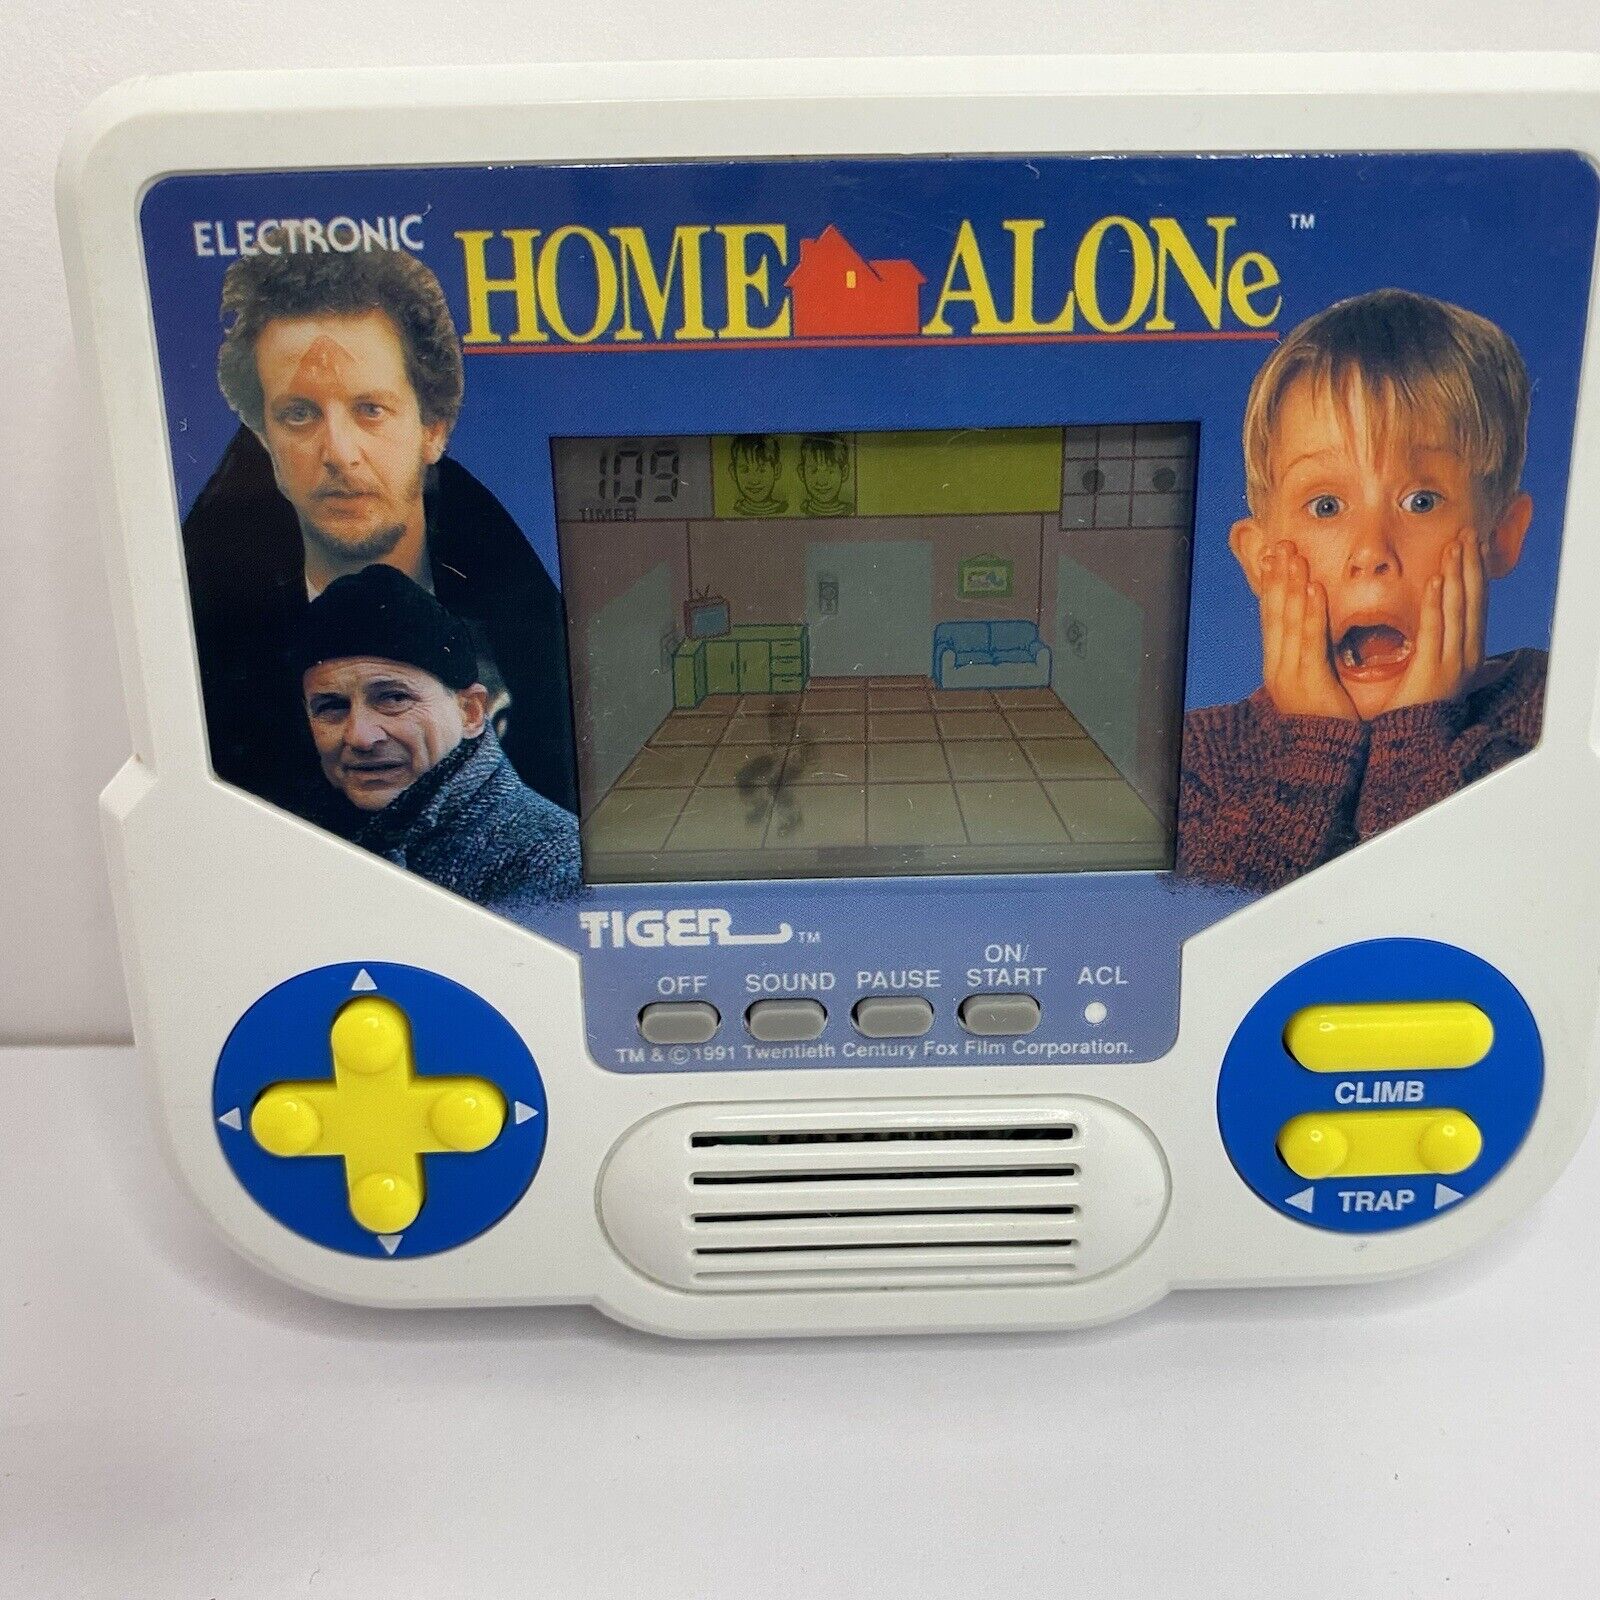 RARE VINTAGE HOME ALONE HAND HELD ELECTRONIC GAME - 1988 TIGER - WORKS GREAT